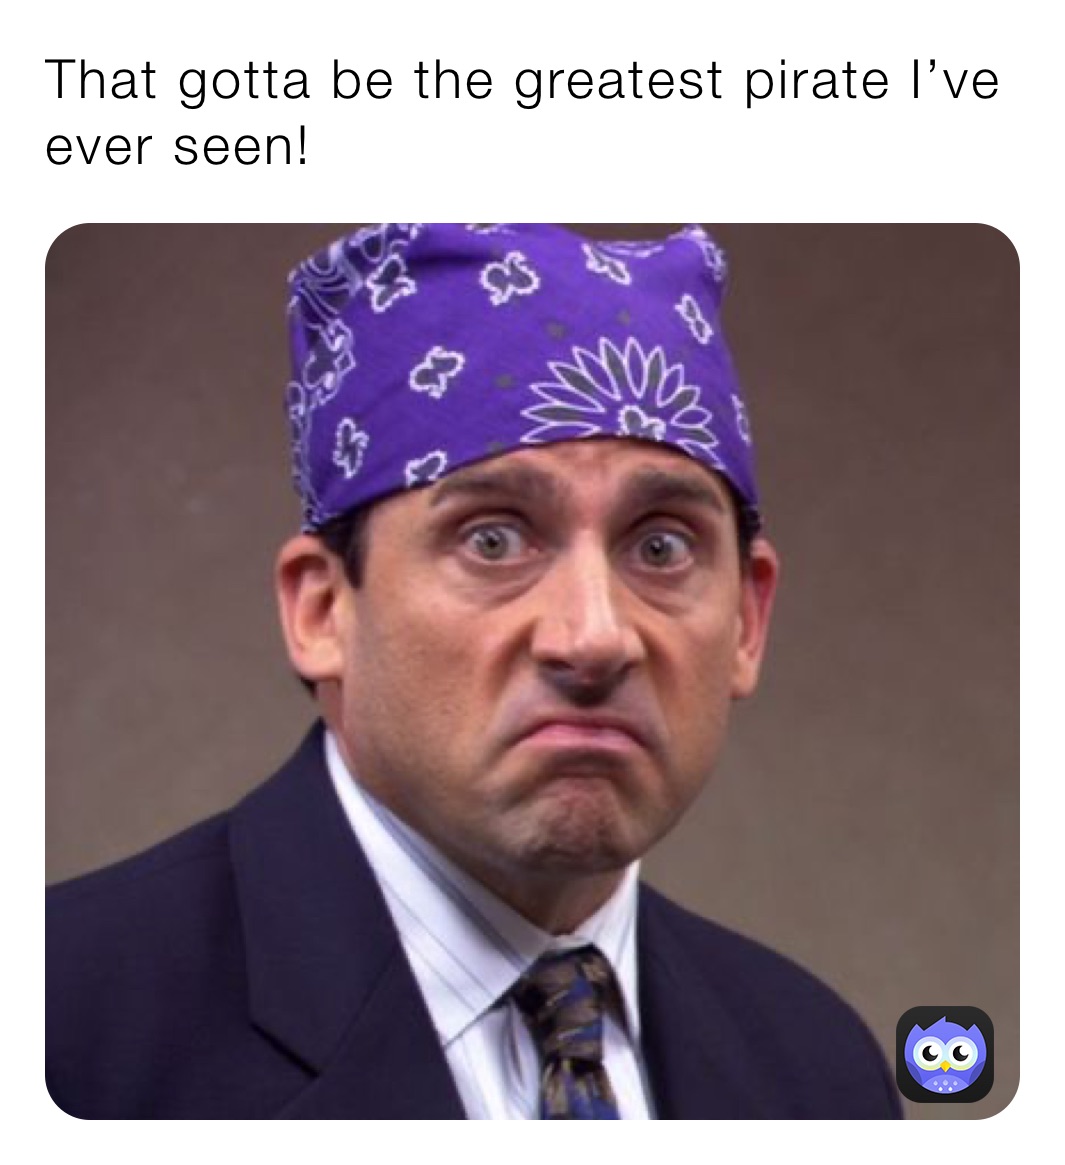 That gotta be the greatest pirate I’ve ever seen!